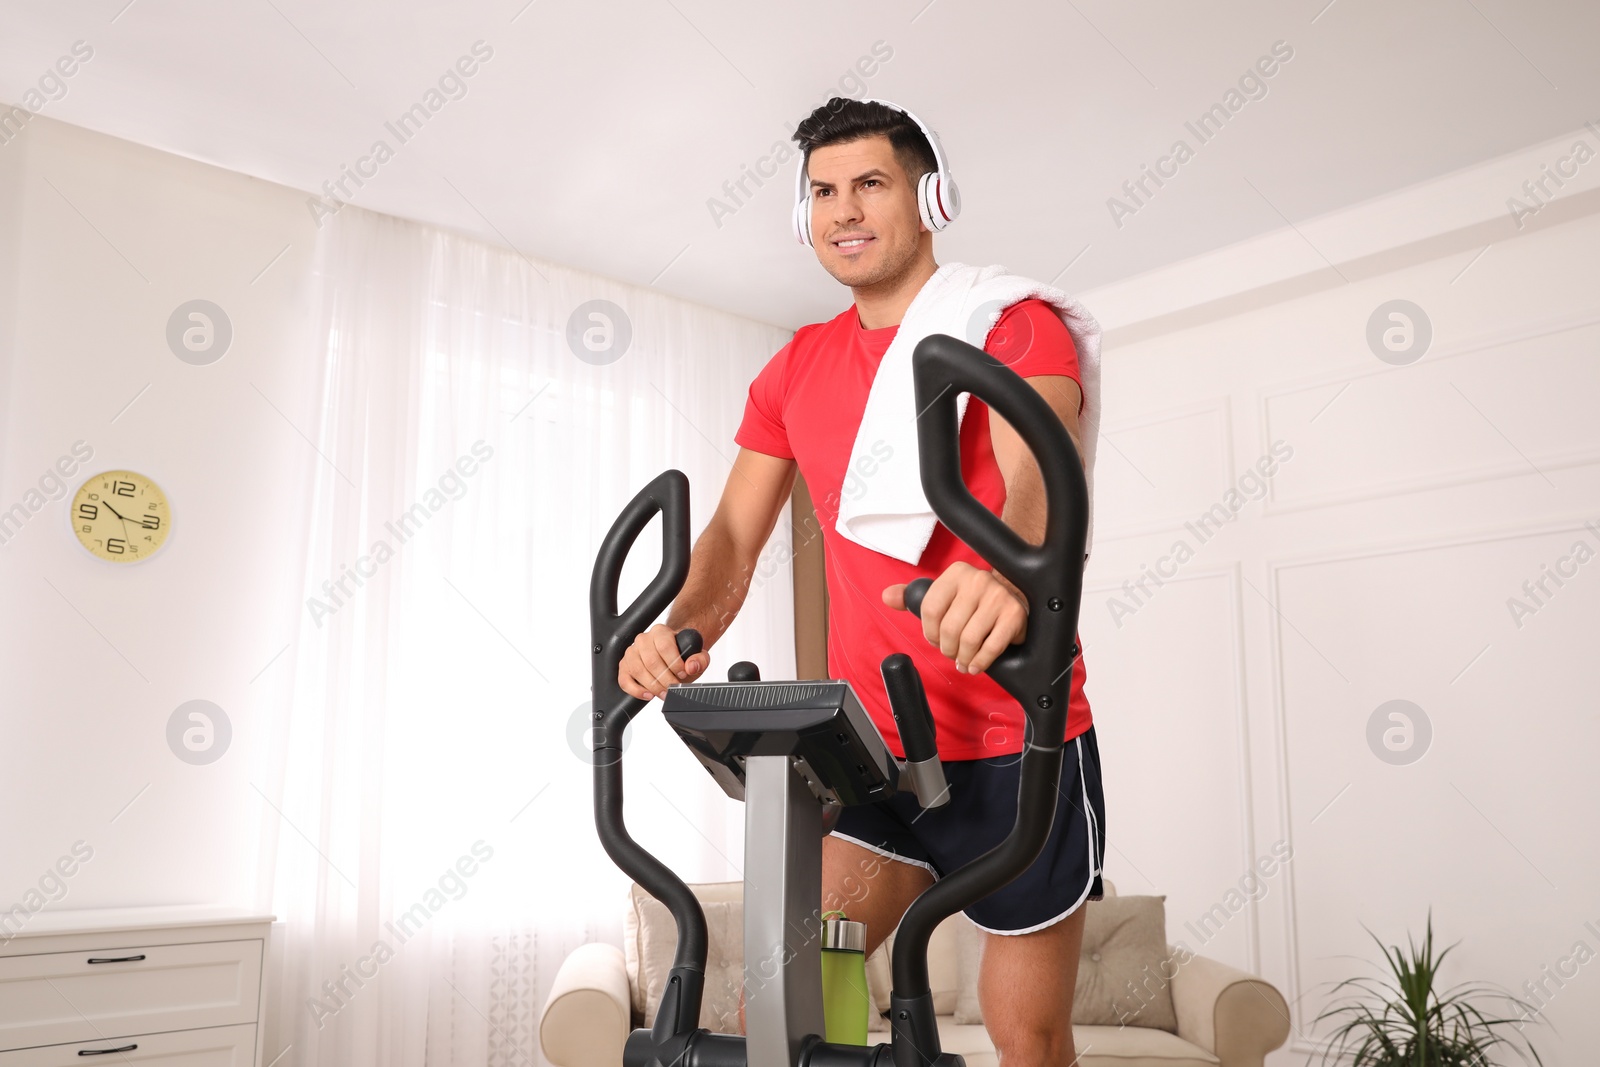 Photo of Man with headphones and towel using modern elliptical machine at home